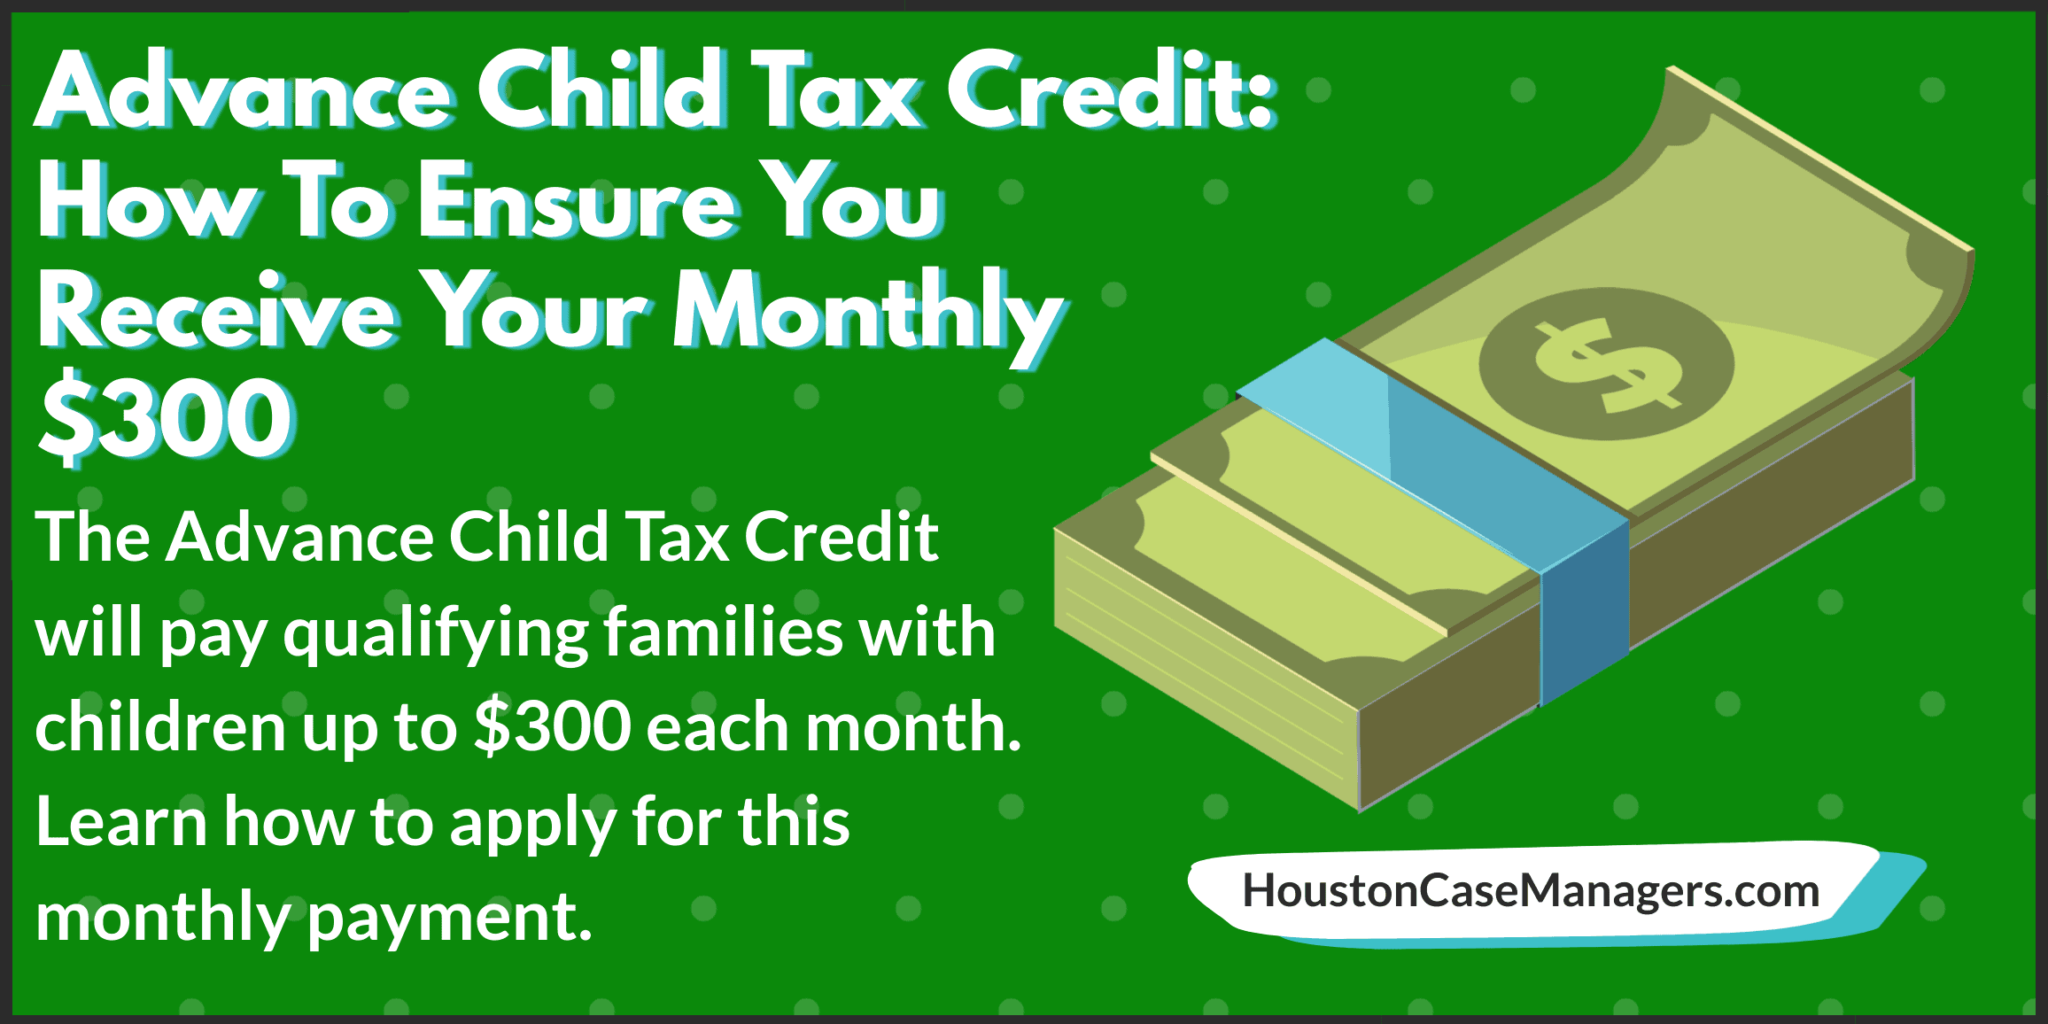 advance-child-tax-credit-how-to-ensure-you-receive-your-monthly-300